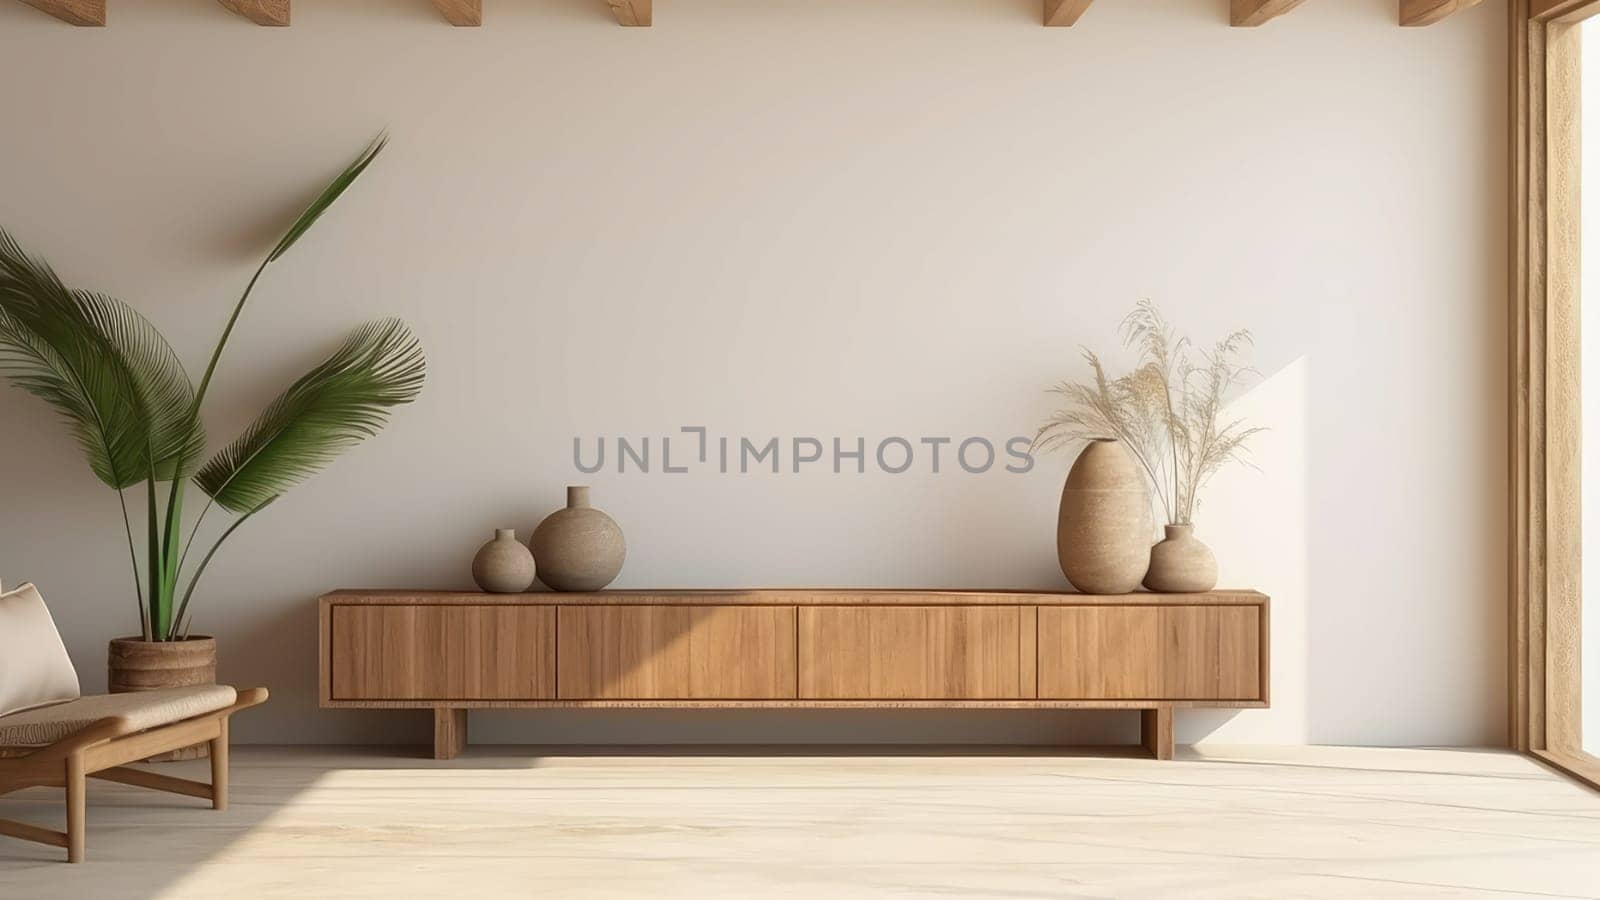 3d rendering of a potted plant on wooden storage cabinet in living room. The living room is spacious and has a lot of natural light.